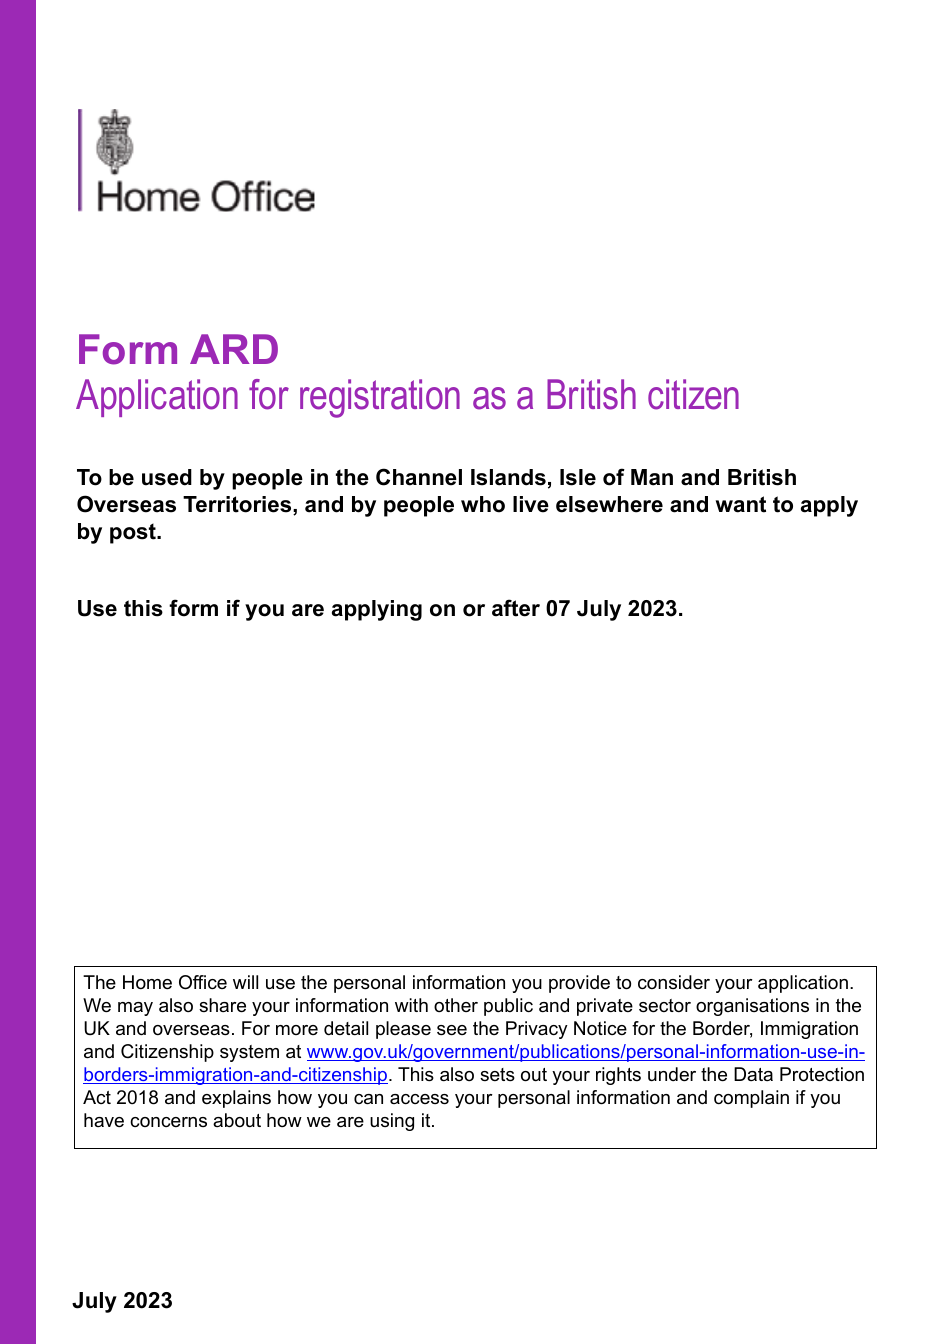 Form ARD Application for Registration as a British Citizen - United Kingdom, Page 1